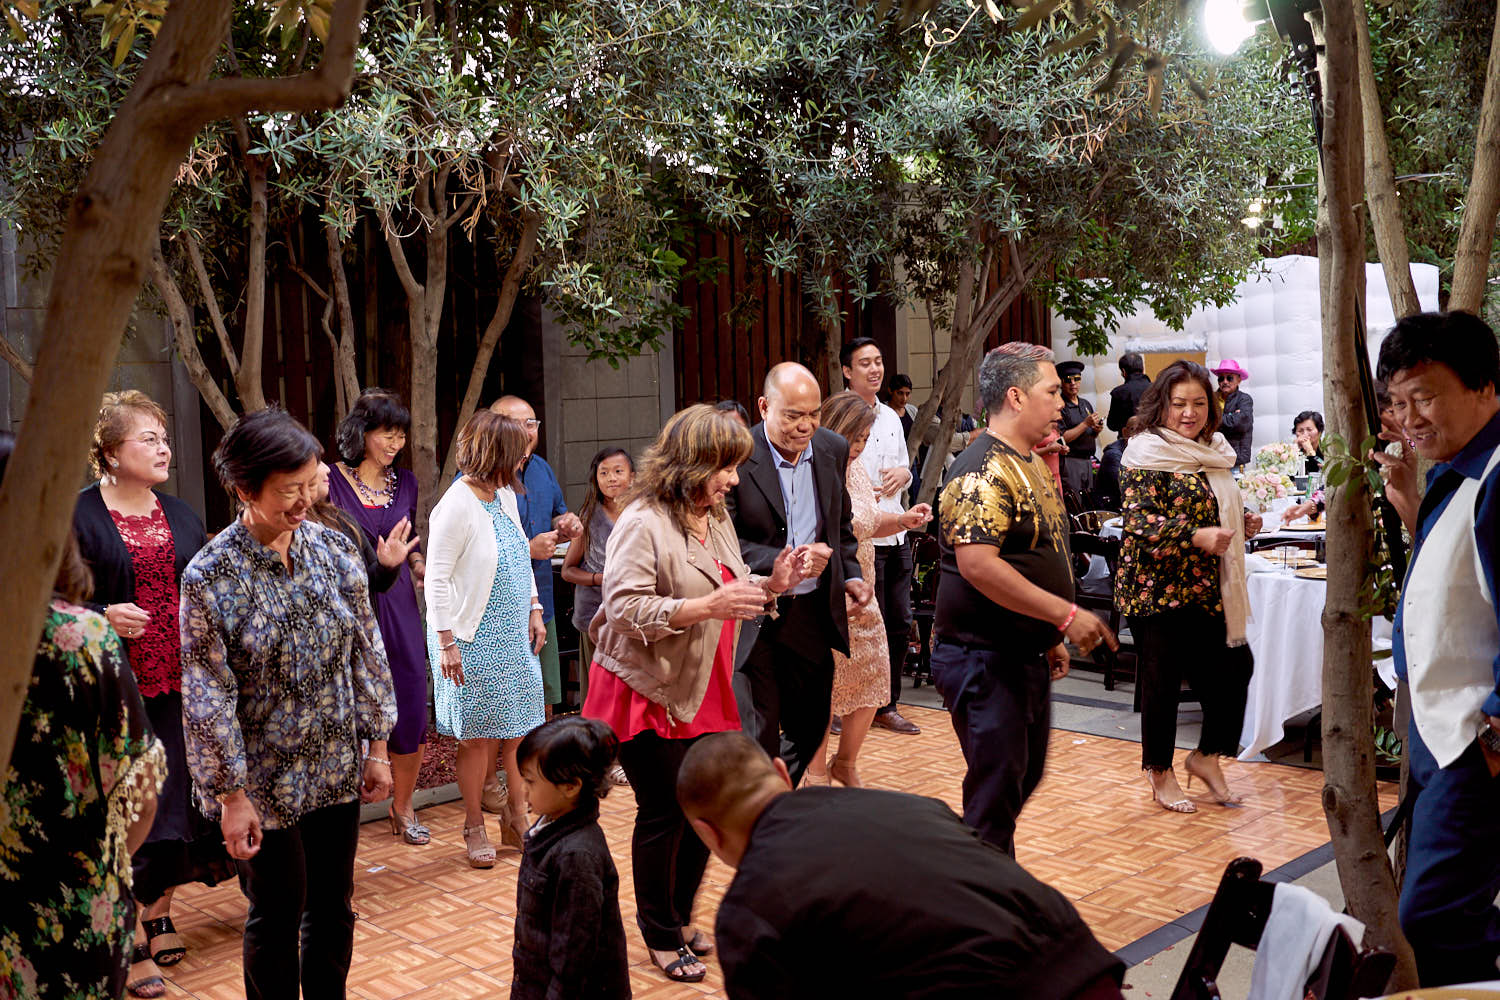 60th-birthday-party-dancing-under-the-trees-photography-mosaic-restaurant-san-jose